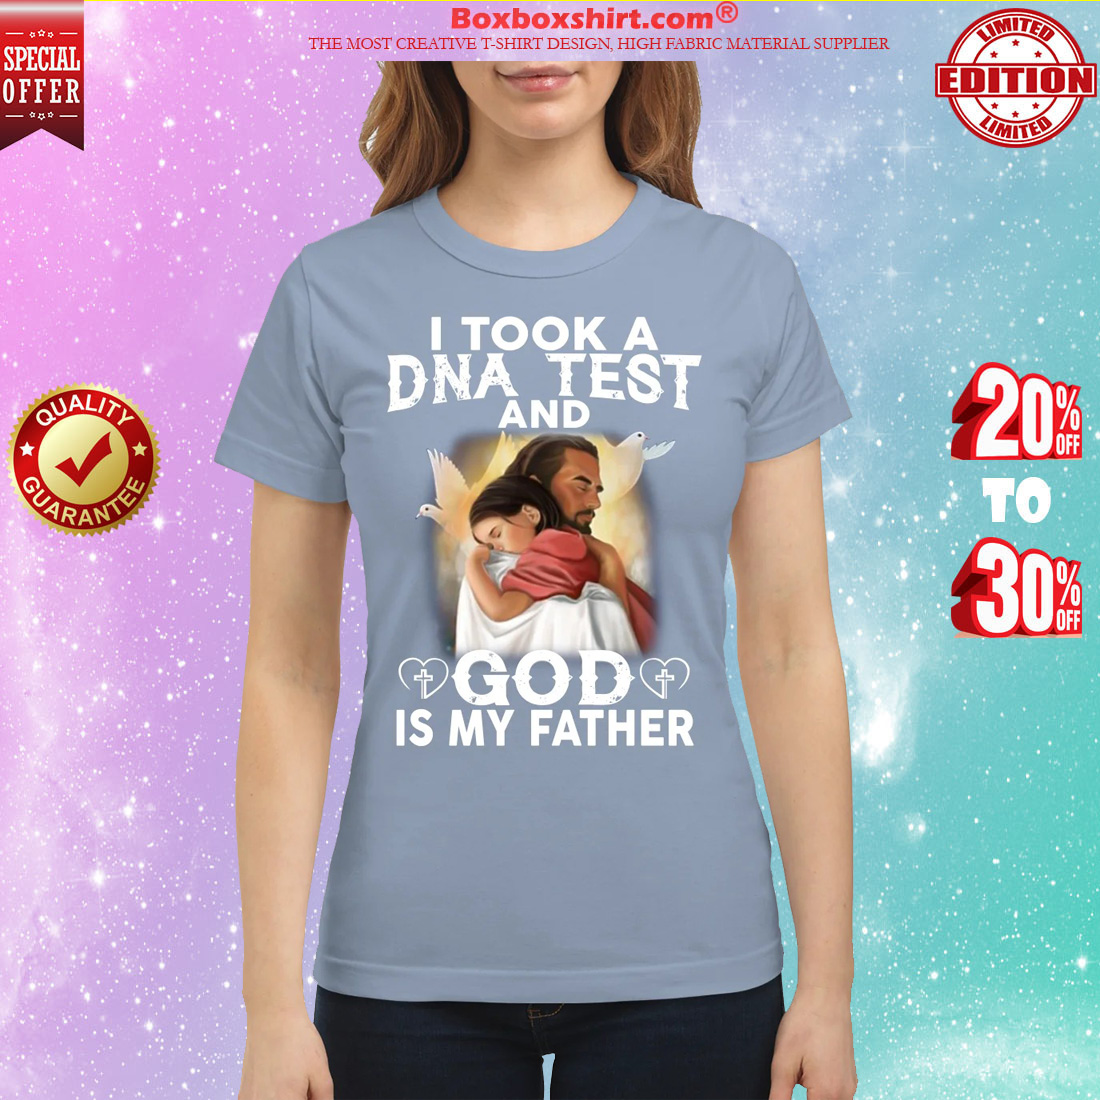 I took a DNA test and God is my father classic shirt